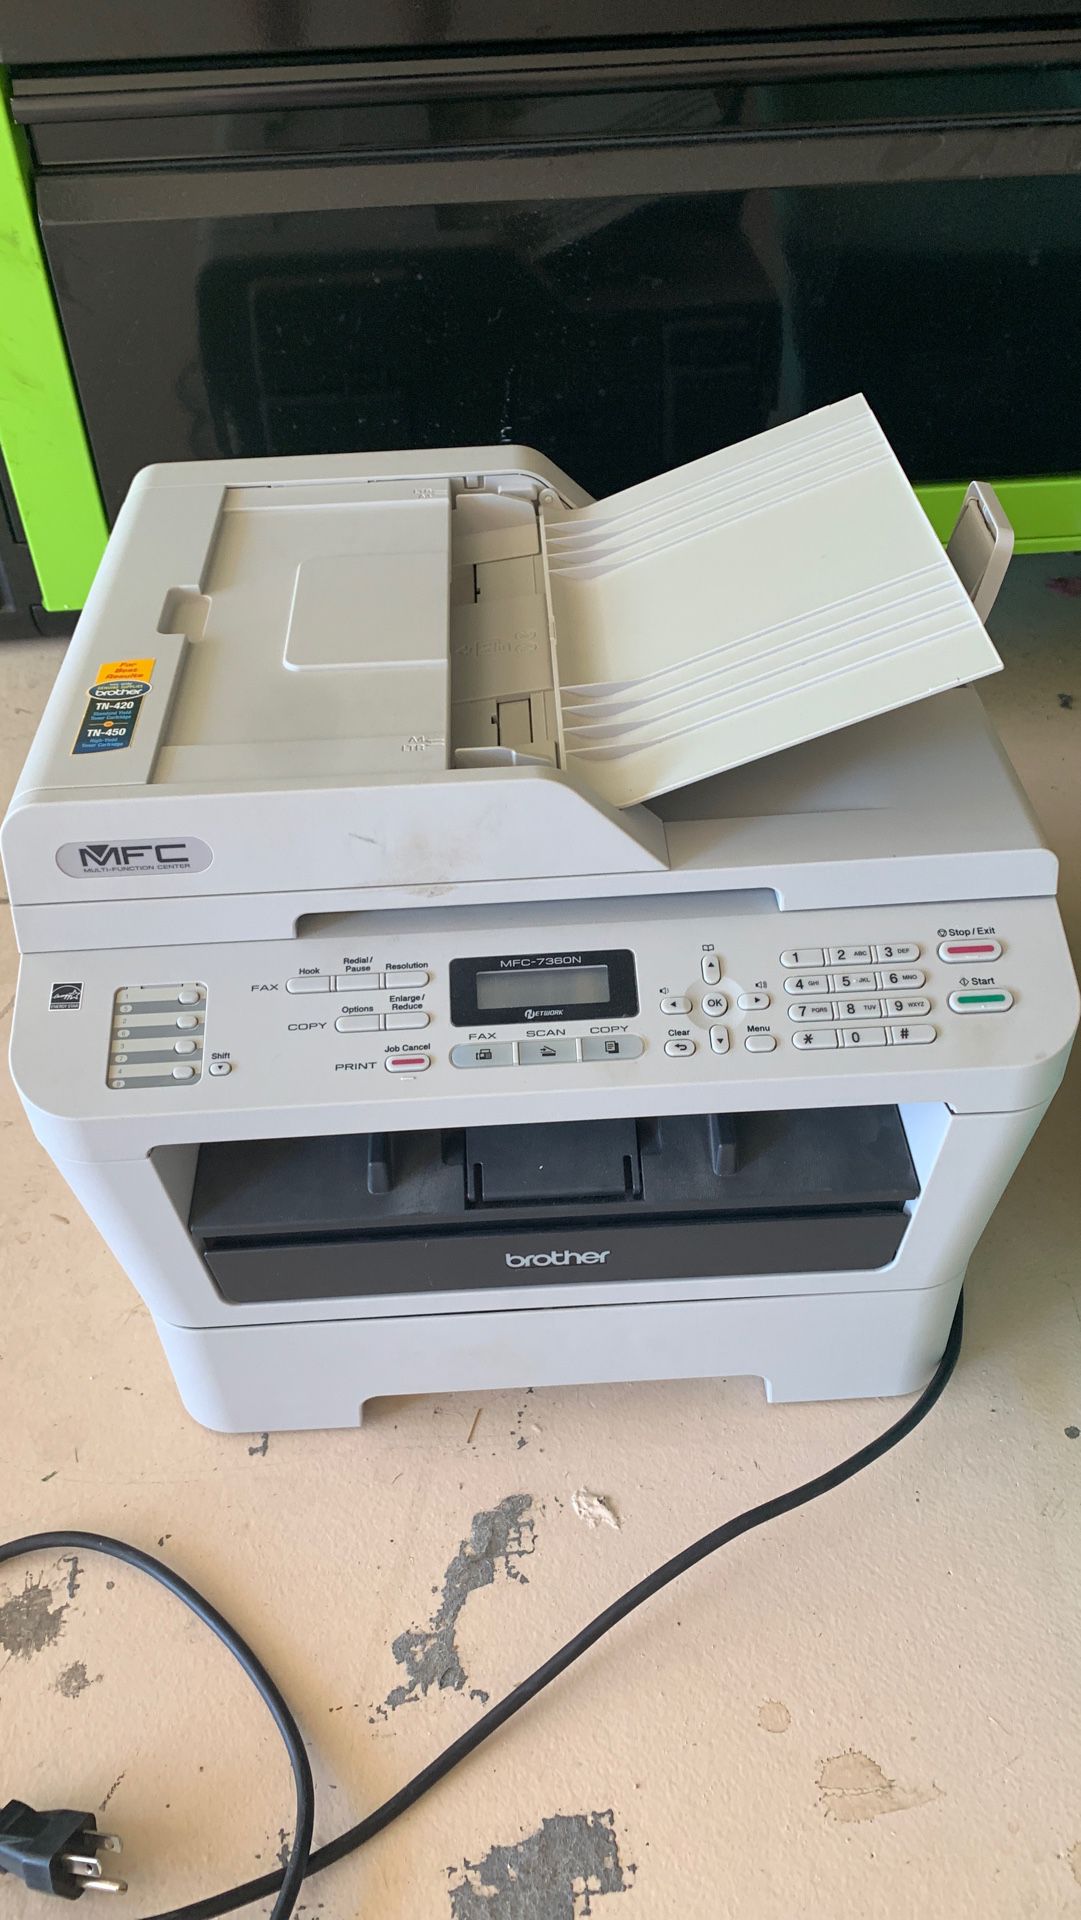 Brother Multi function printer fax scanner